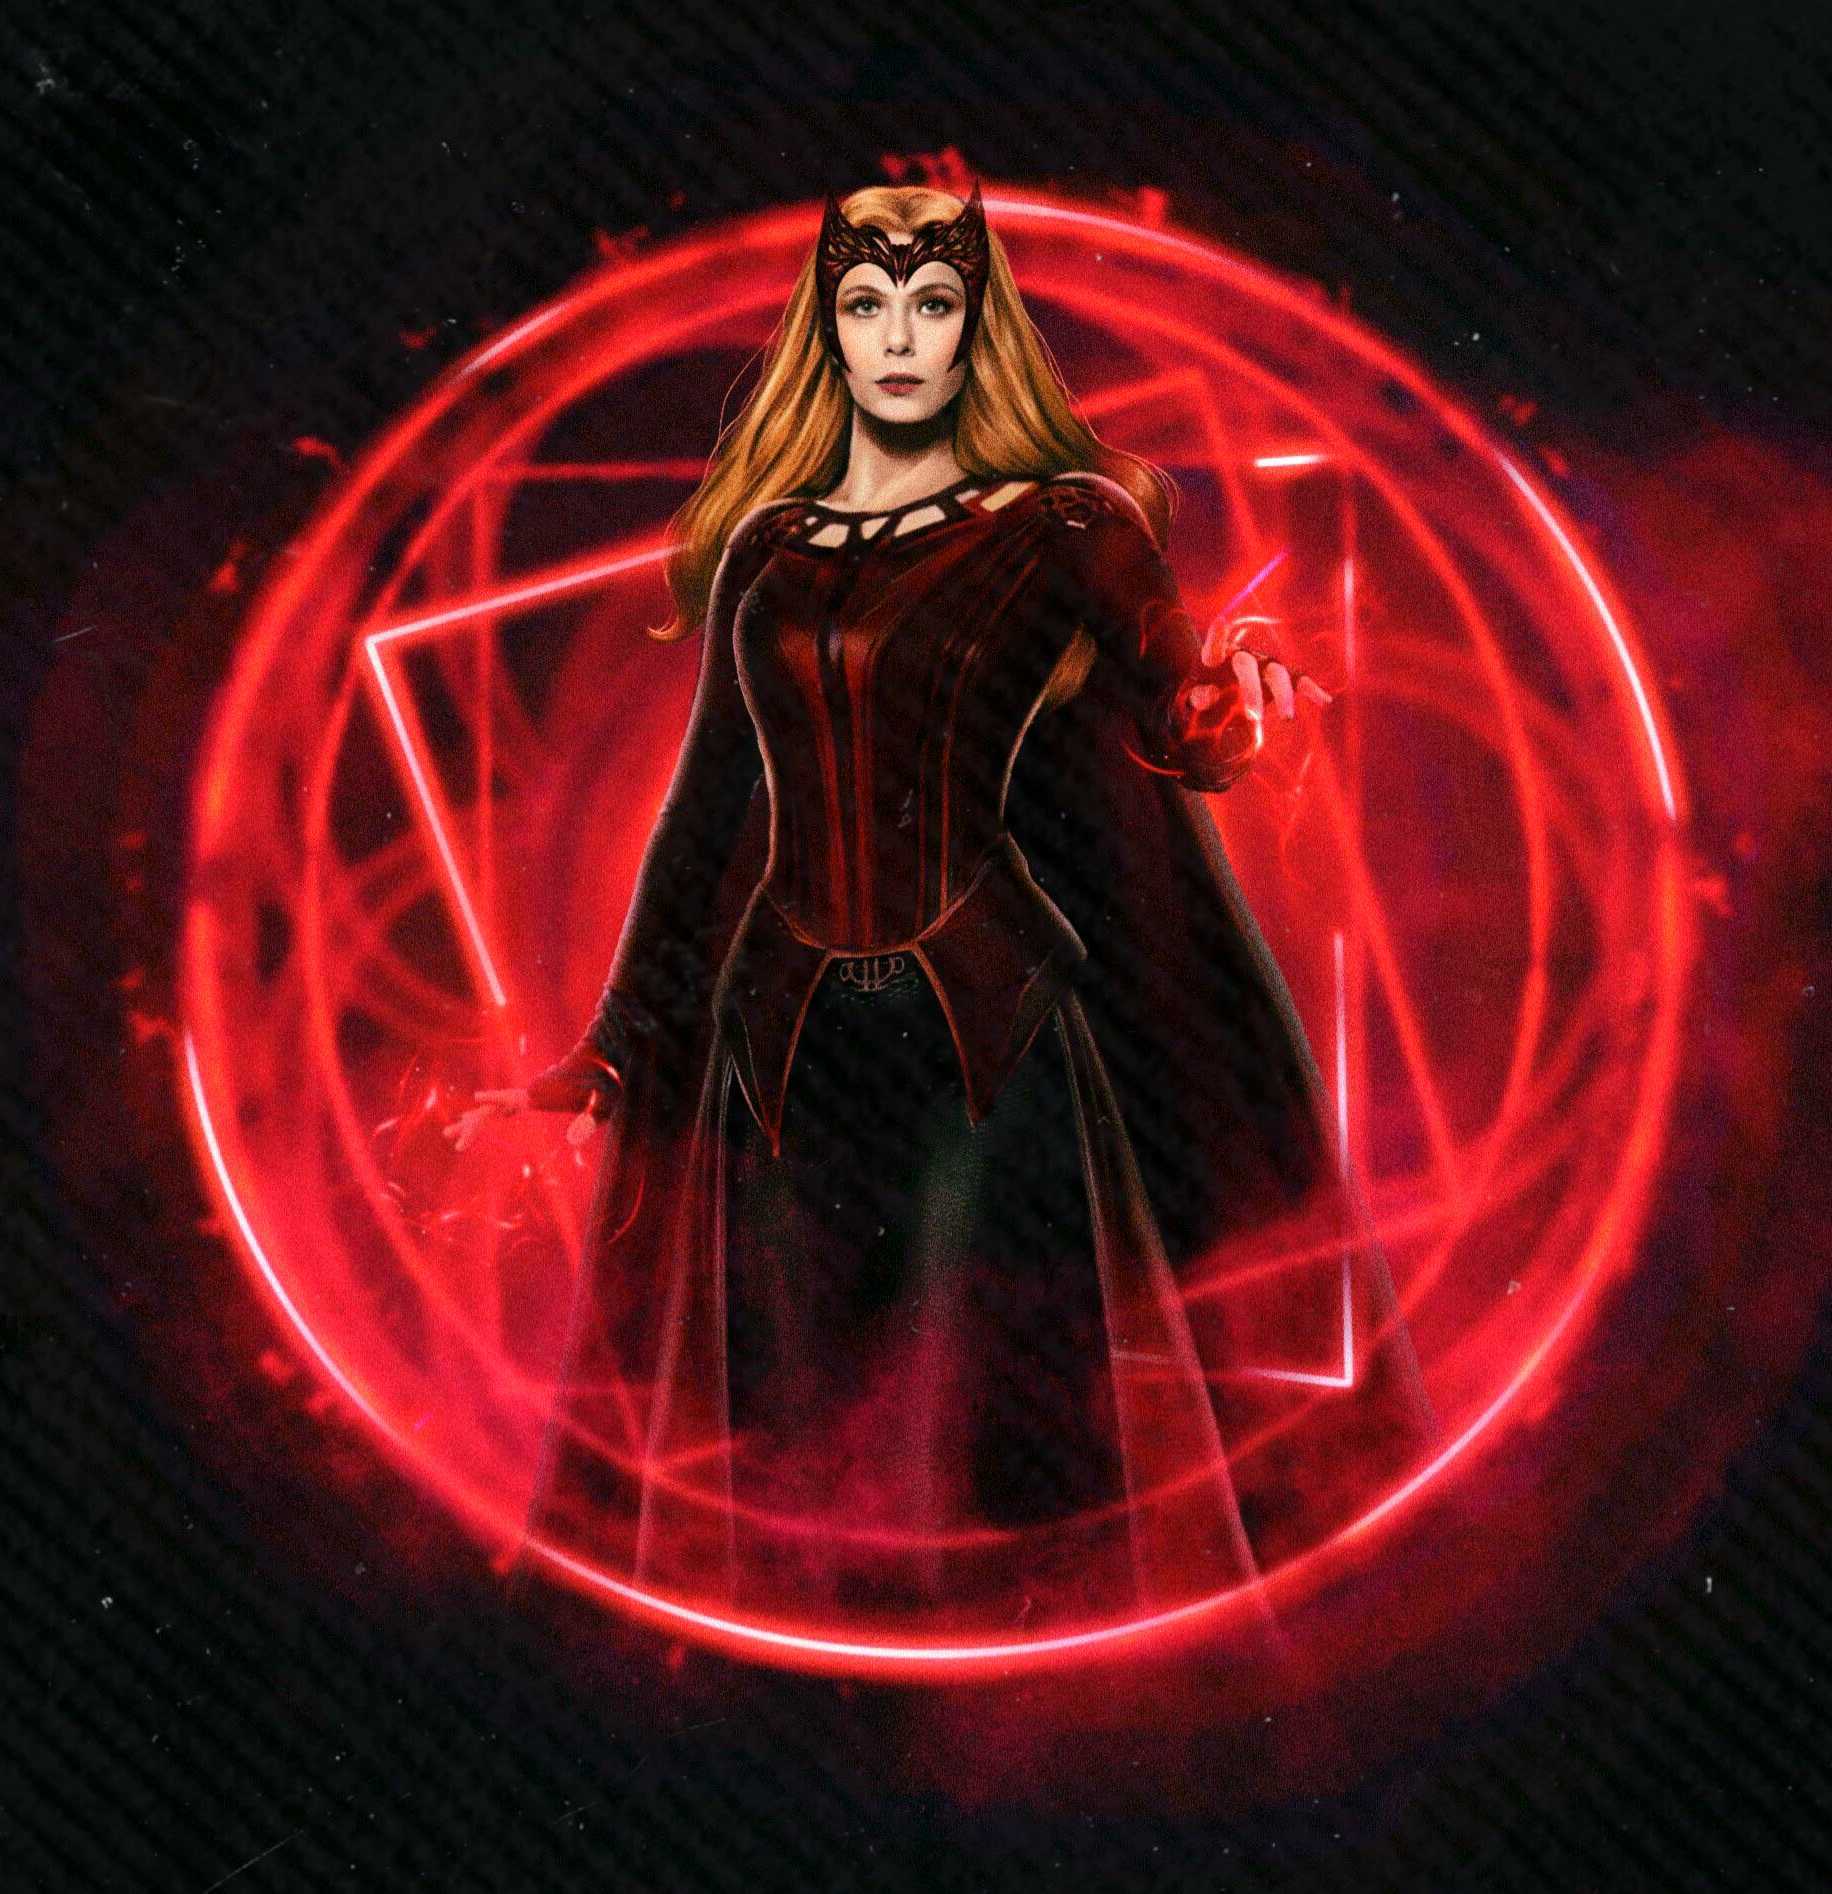 MCU Direct new look at Elizabeth Olsen's Scarlet Witch has been officially revealed! More new #DoctorStrange2 promo posters